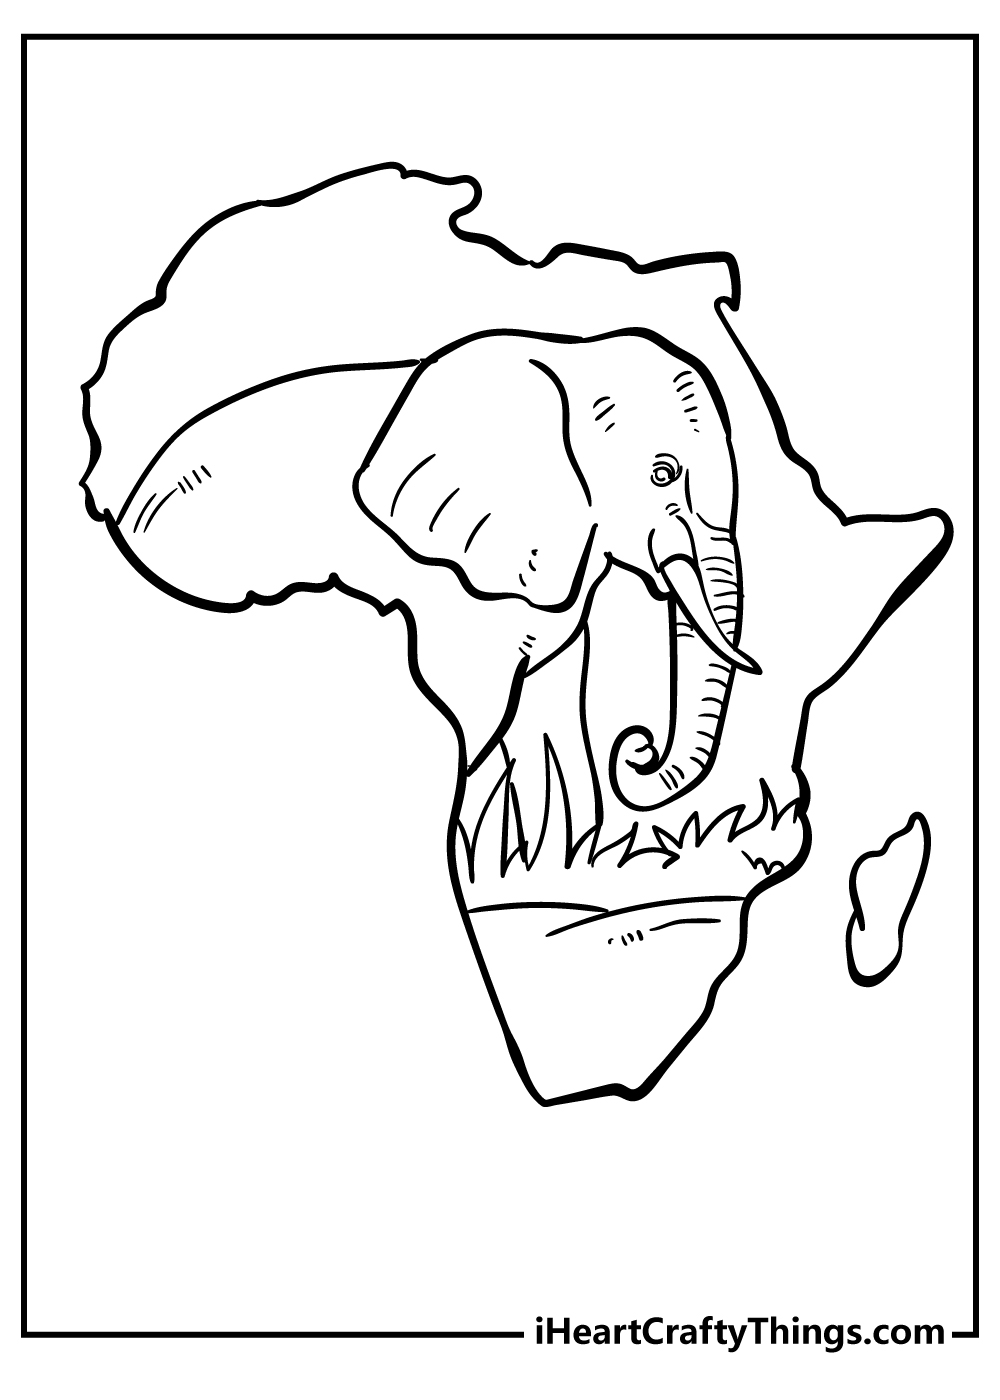 Africa Coloring Book for adults free download